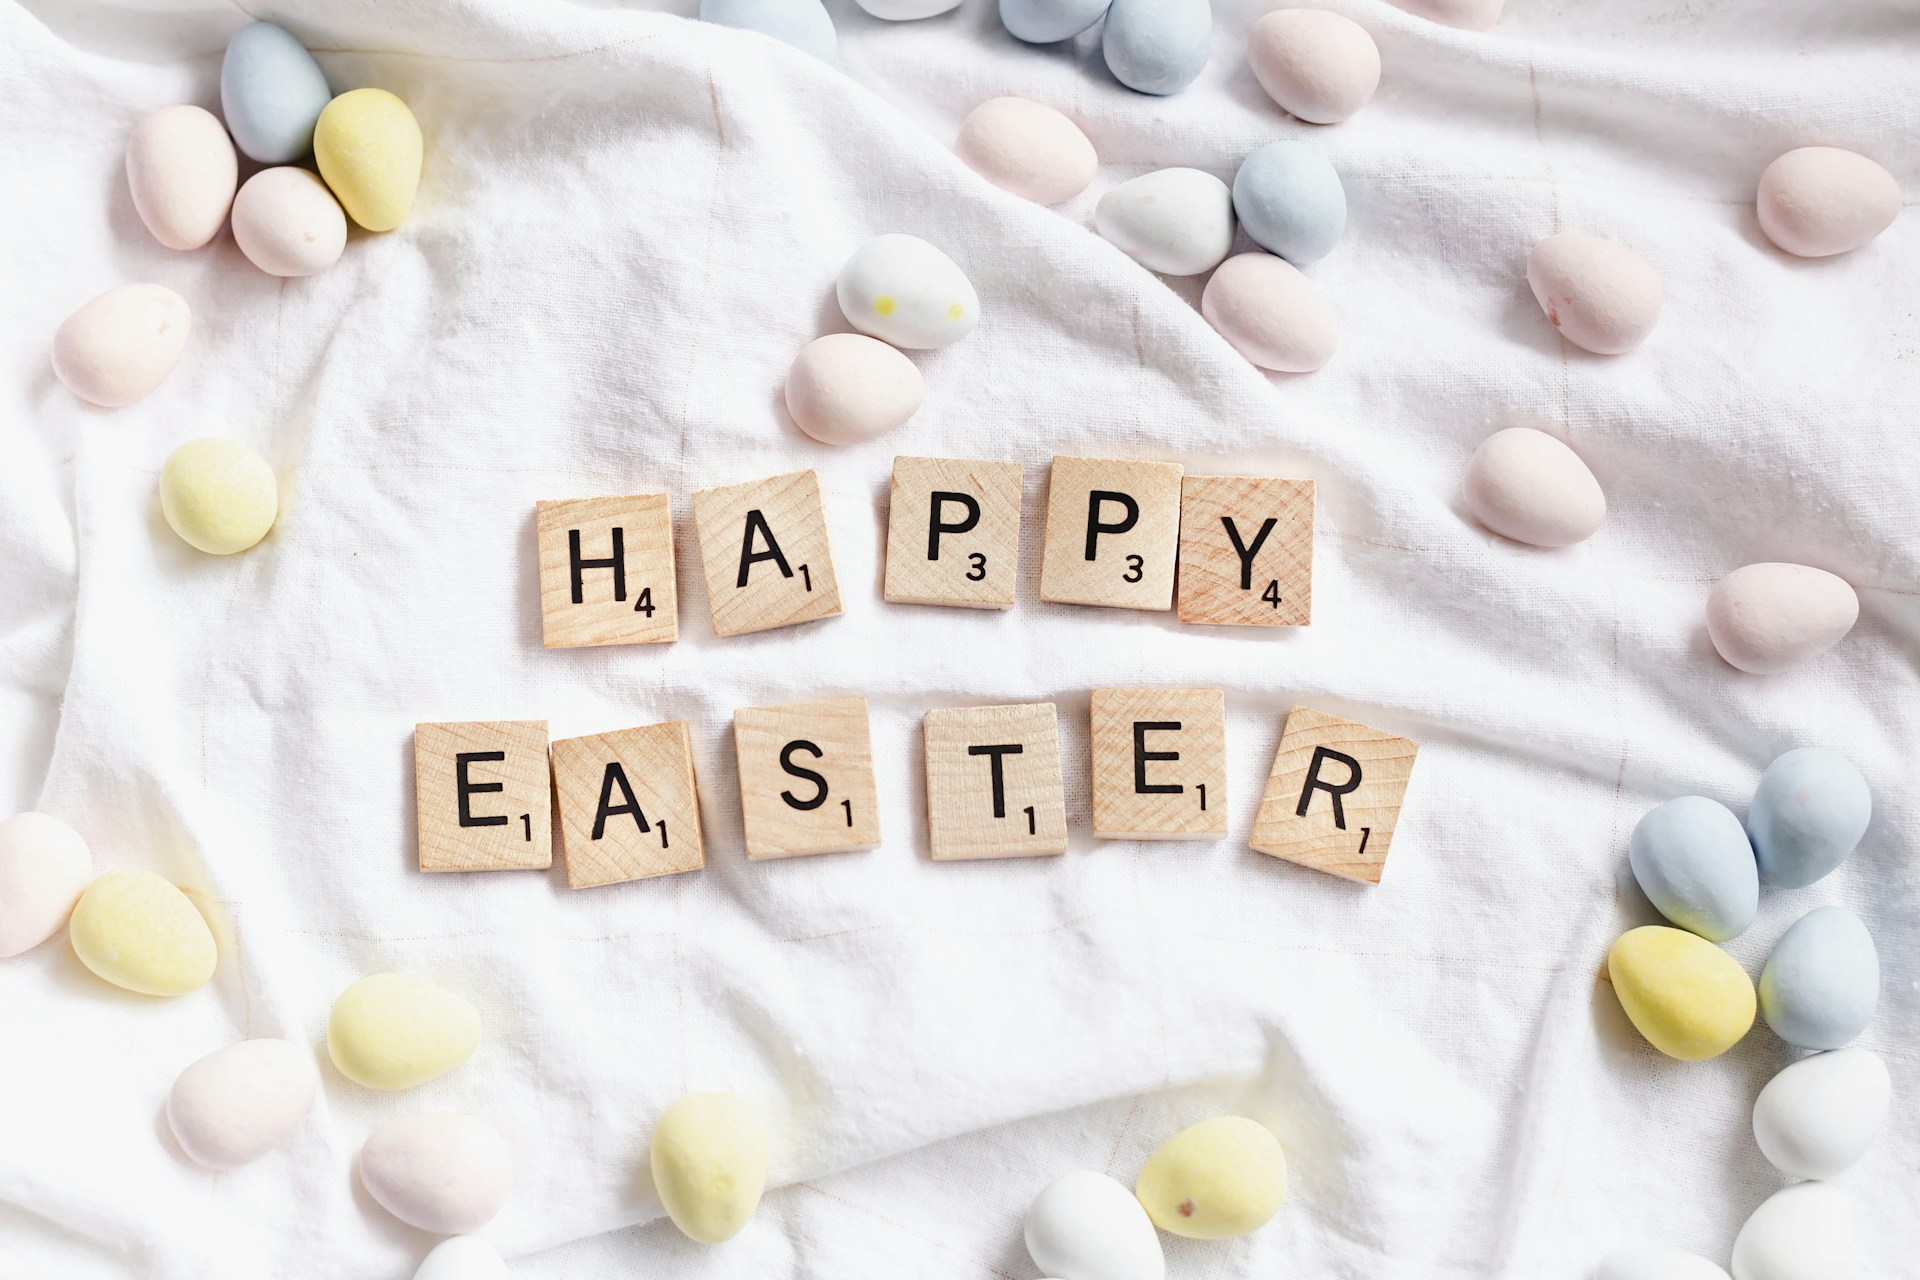 Happy easter text on white cloth with eggs